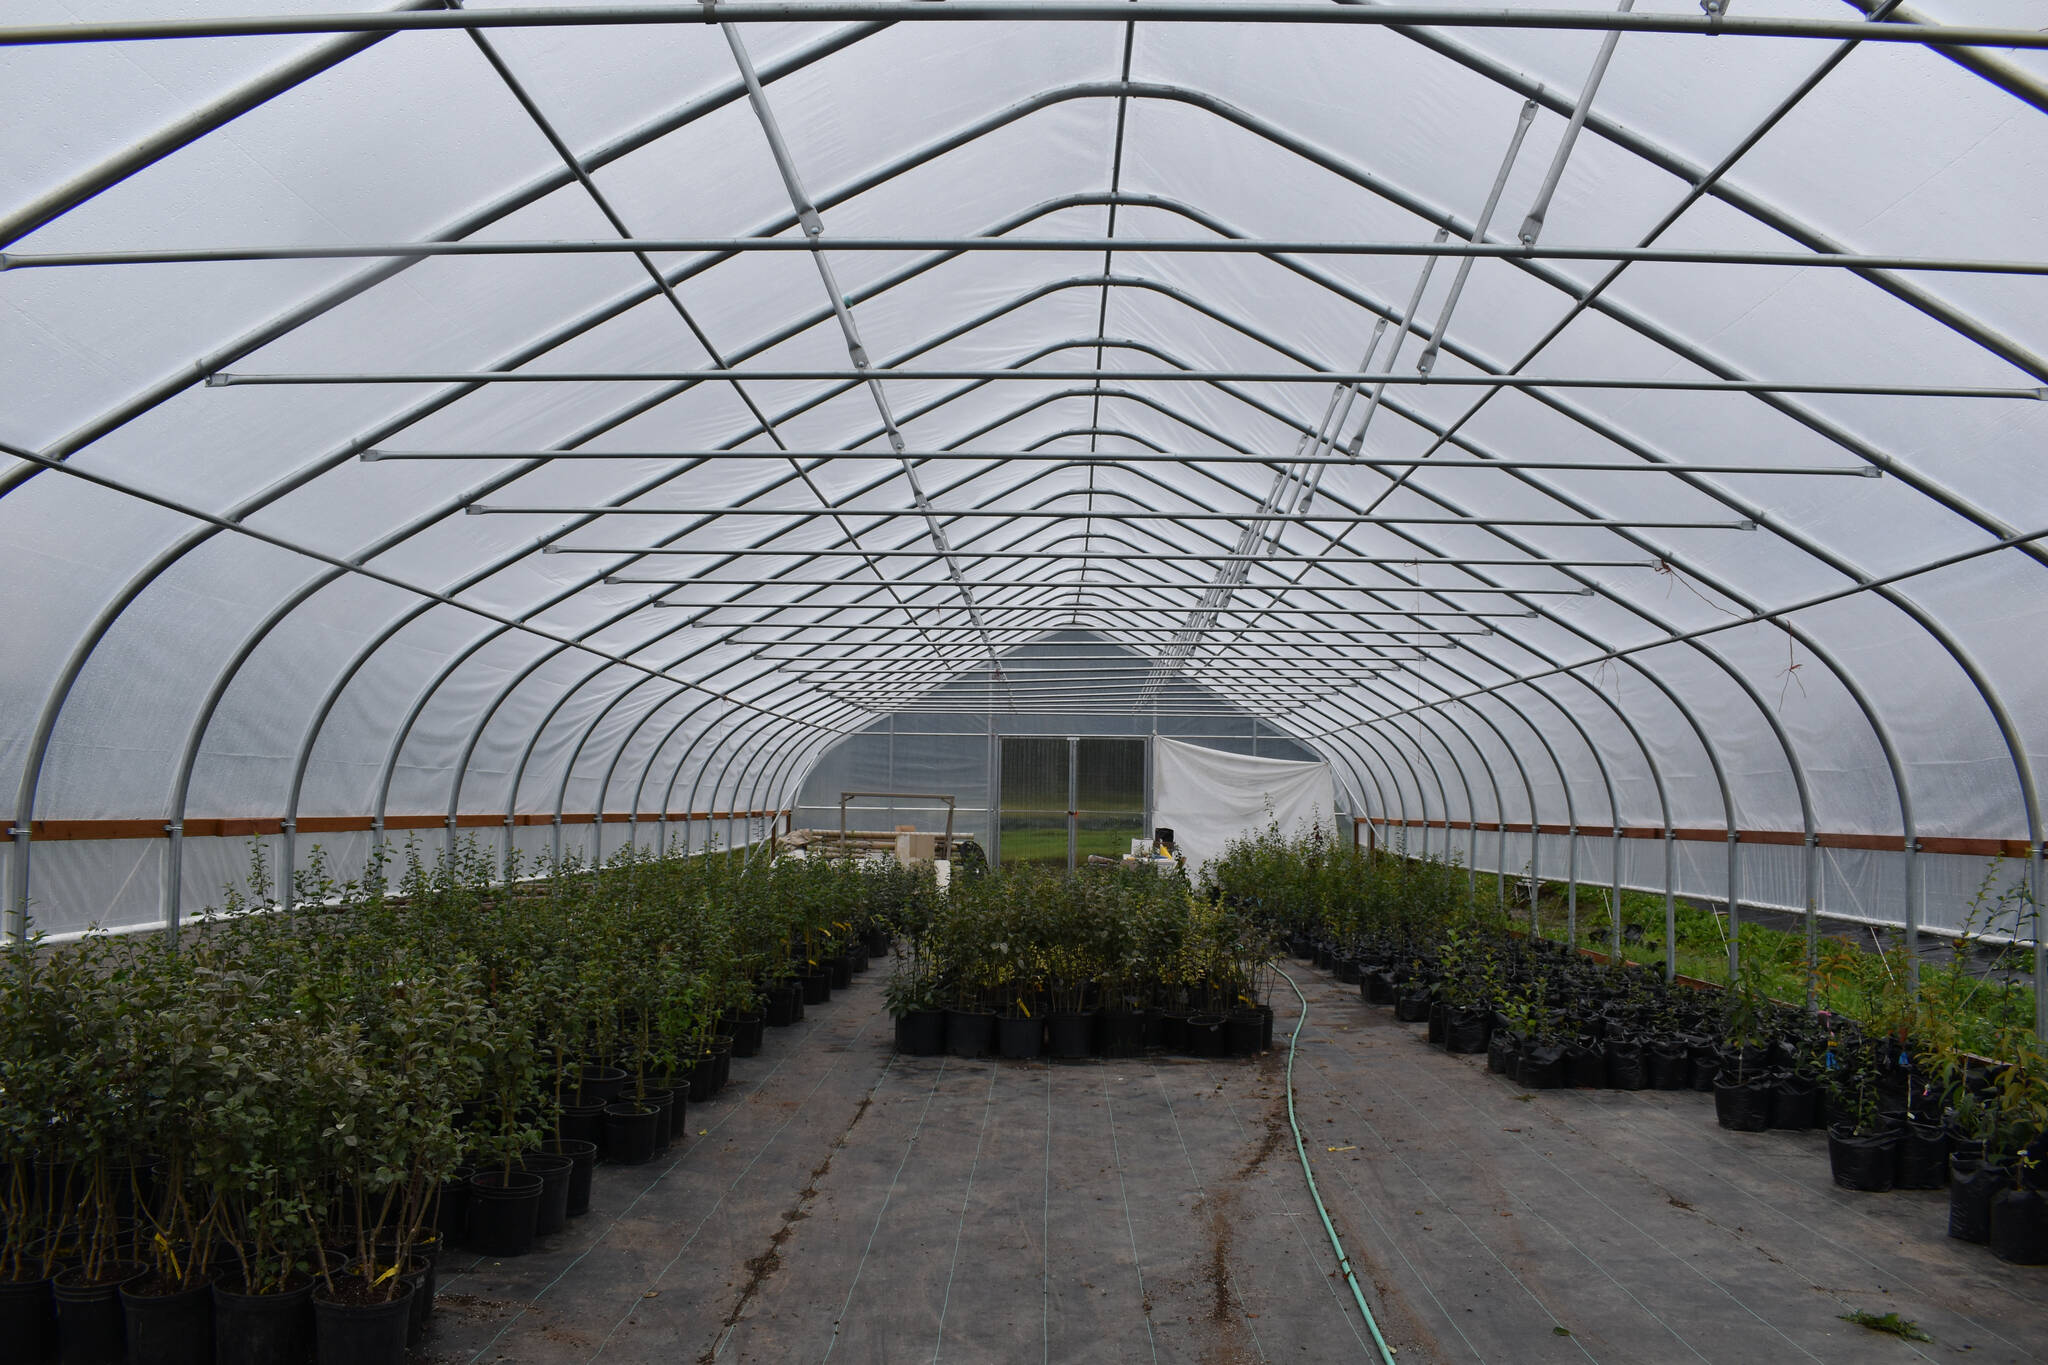 Plants for next years season are prepared for transfer into the other high tunnel structures on Wednesday, Aug. 31, 2022, in Nikiski, Alaska. (Jake Dye/Peninsula Clarion)